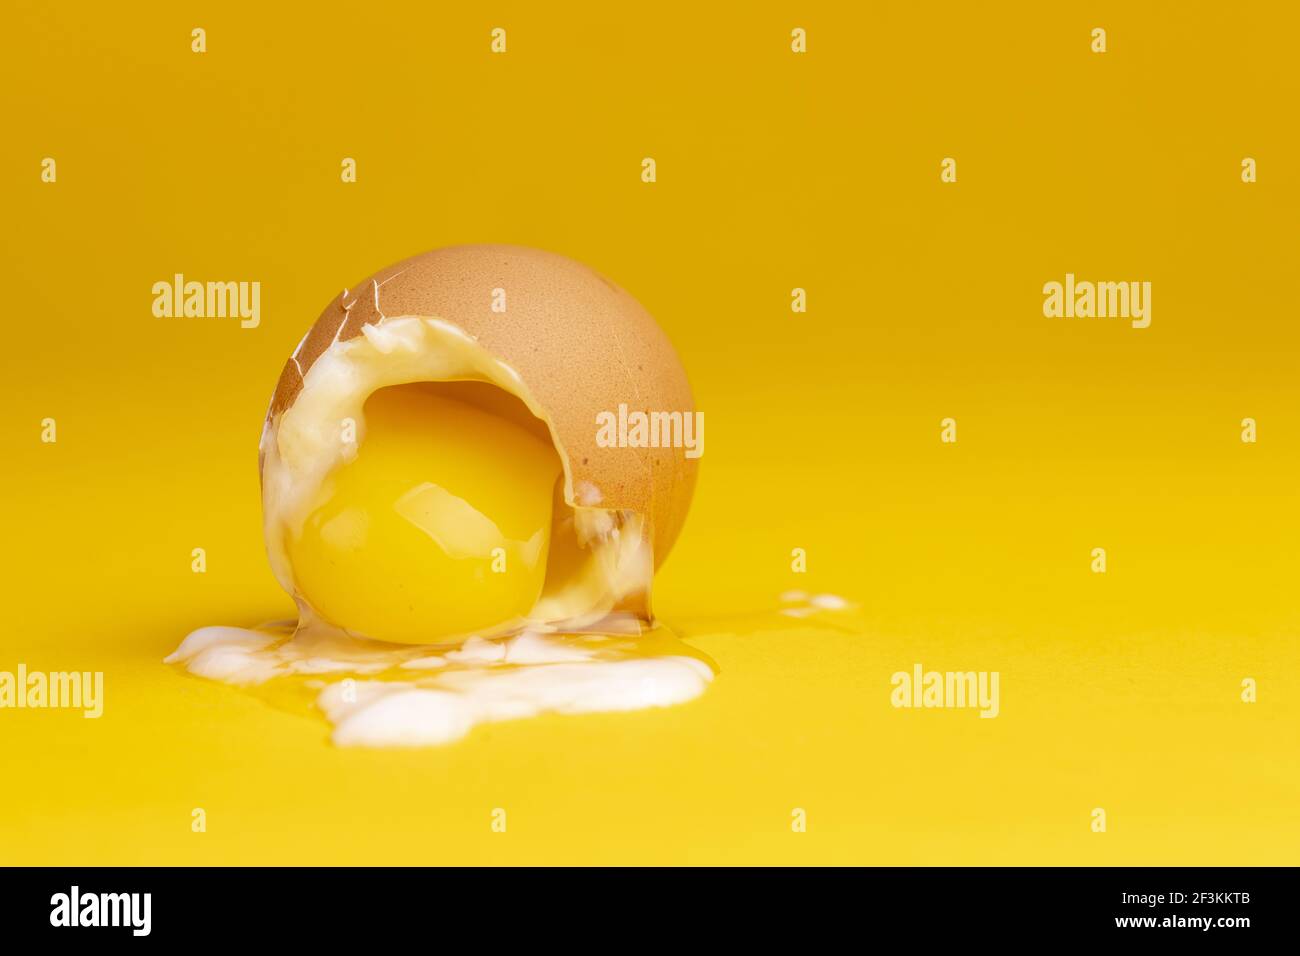 Yoke out of broken shell of soft cooked egg with the slimy white spilling over a seamless yellow background. Stock Photo